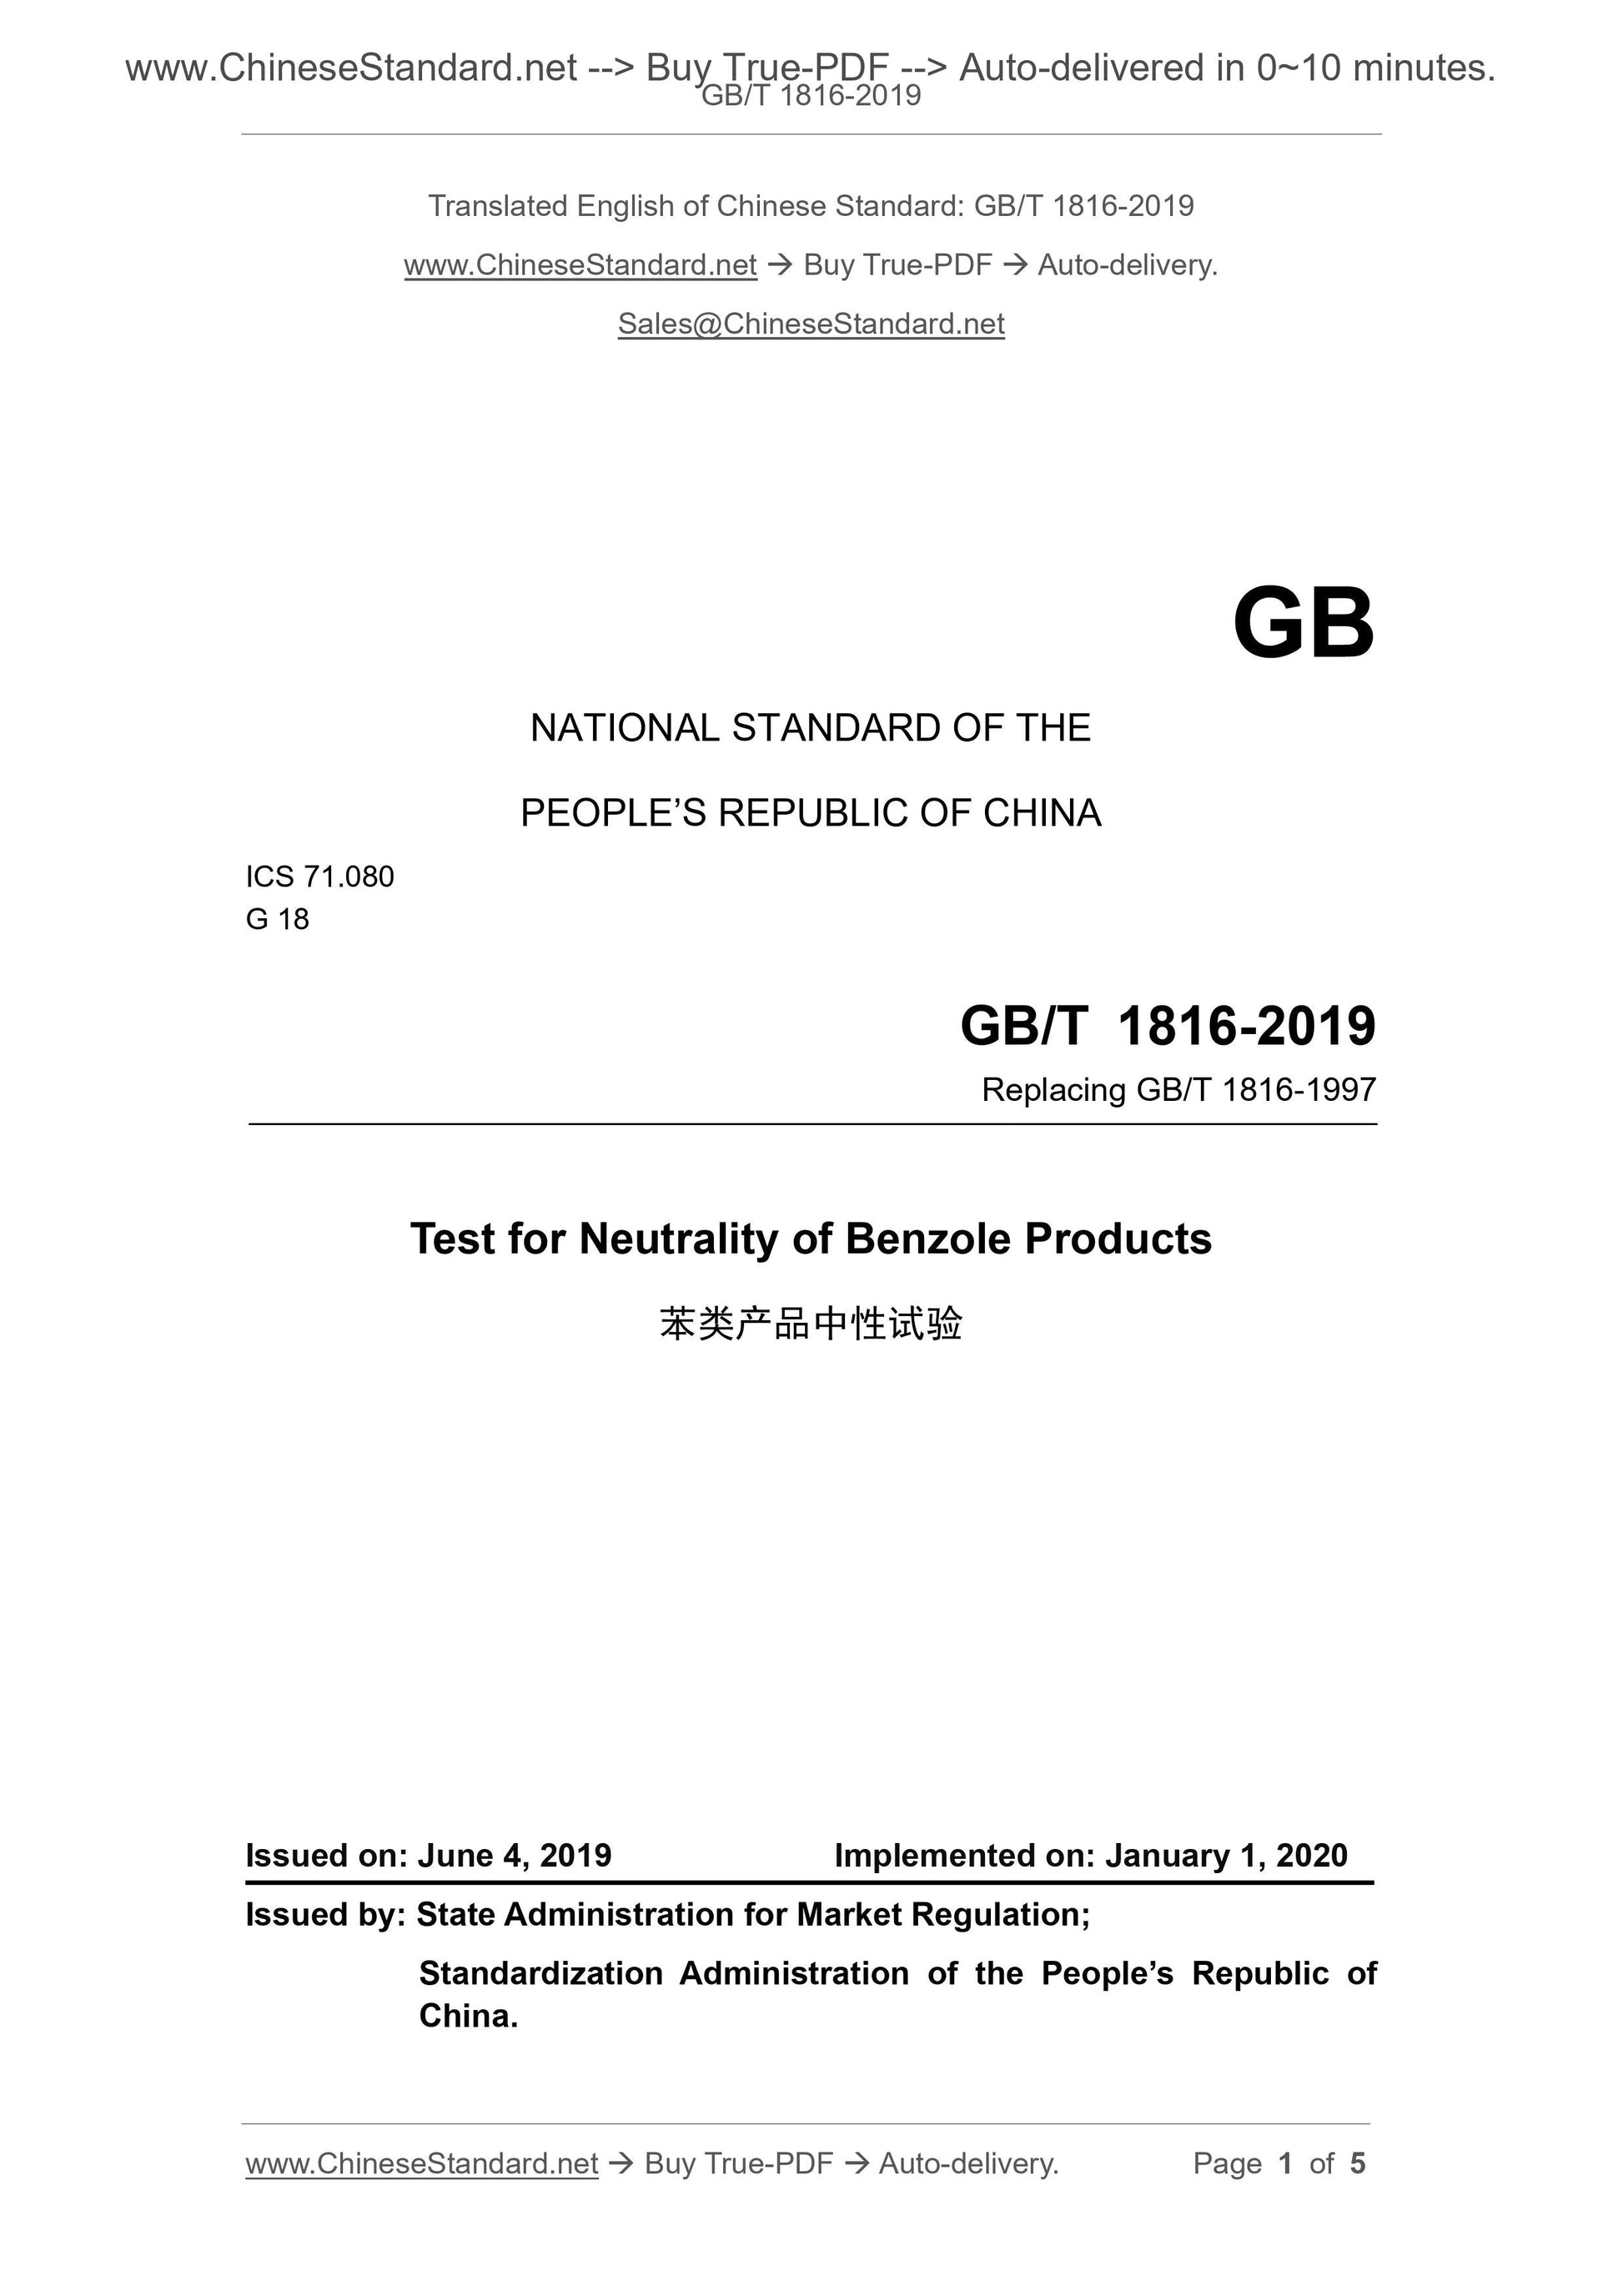 GB/T 1816-2019 Page 1